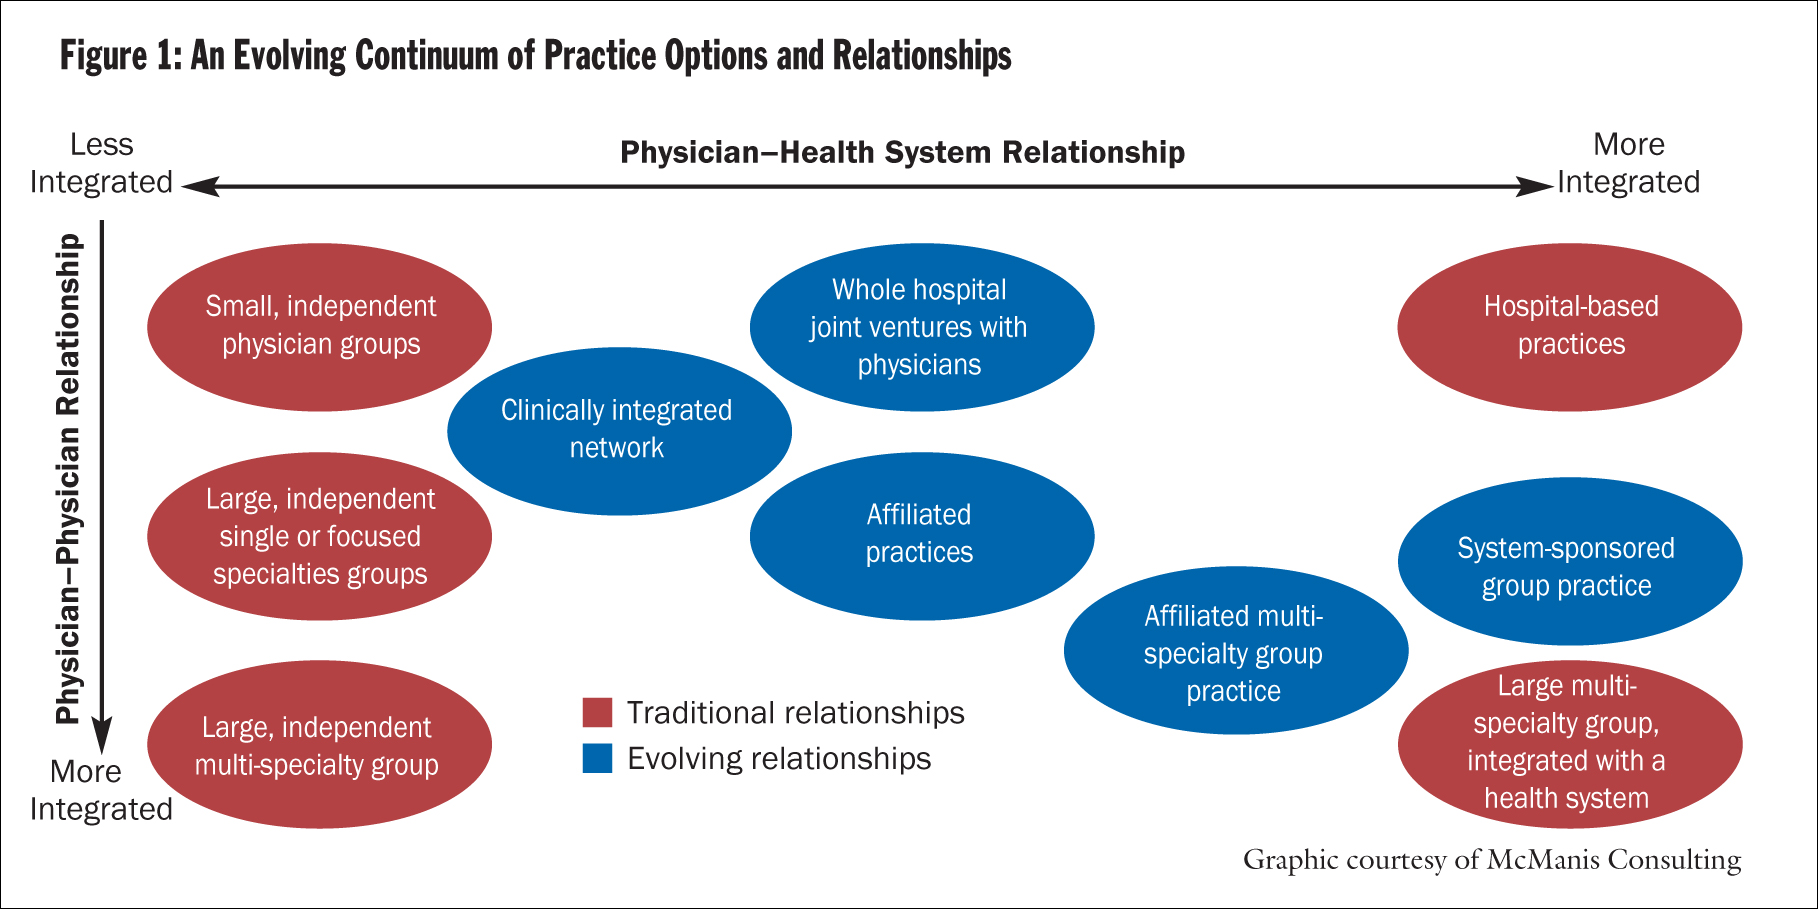 Fig. 1: An Evolving Continuum of Practice Options and Relationships